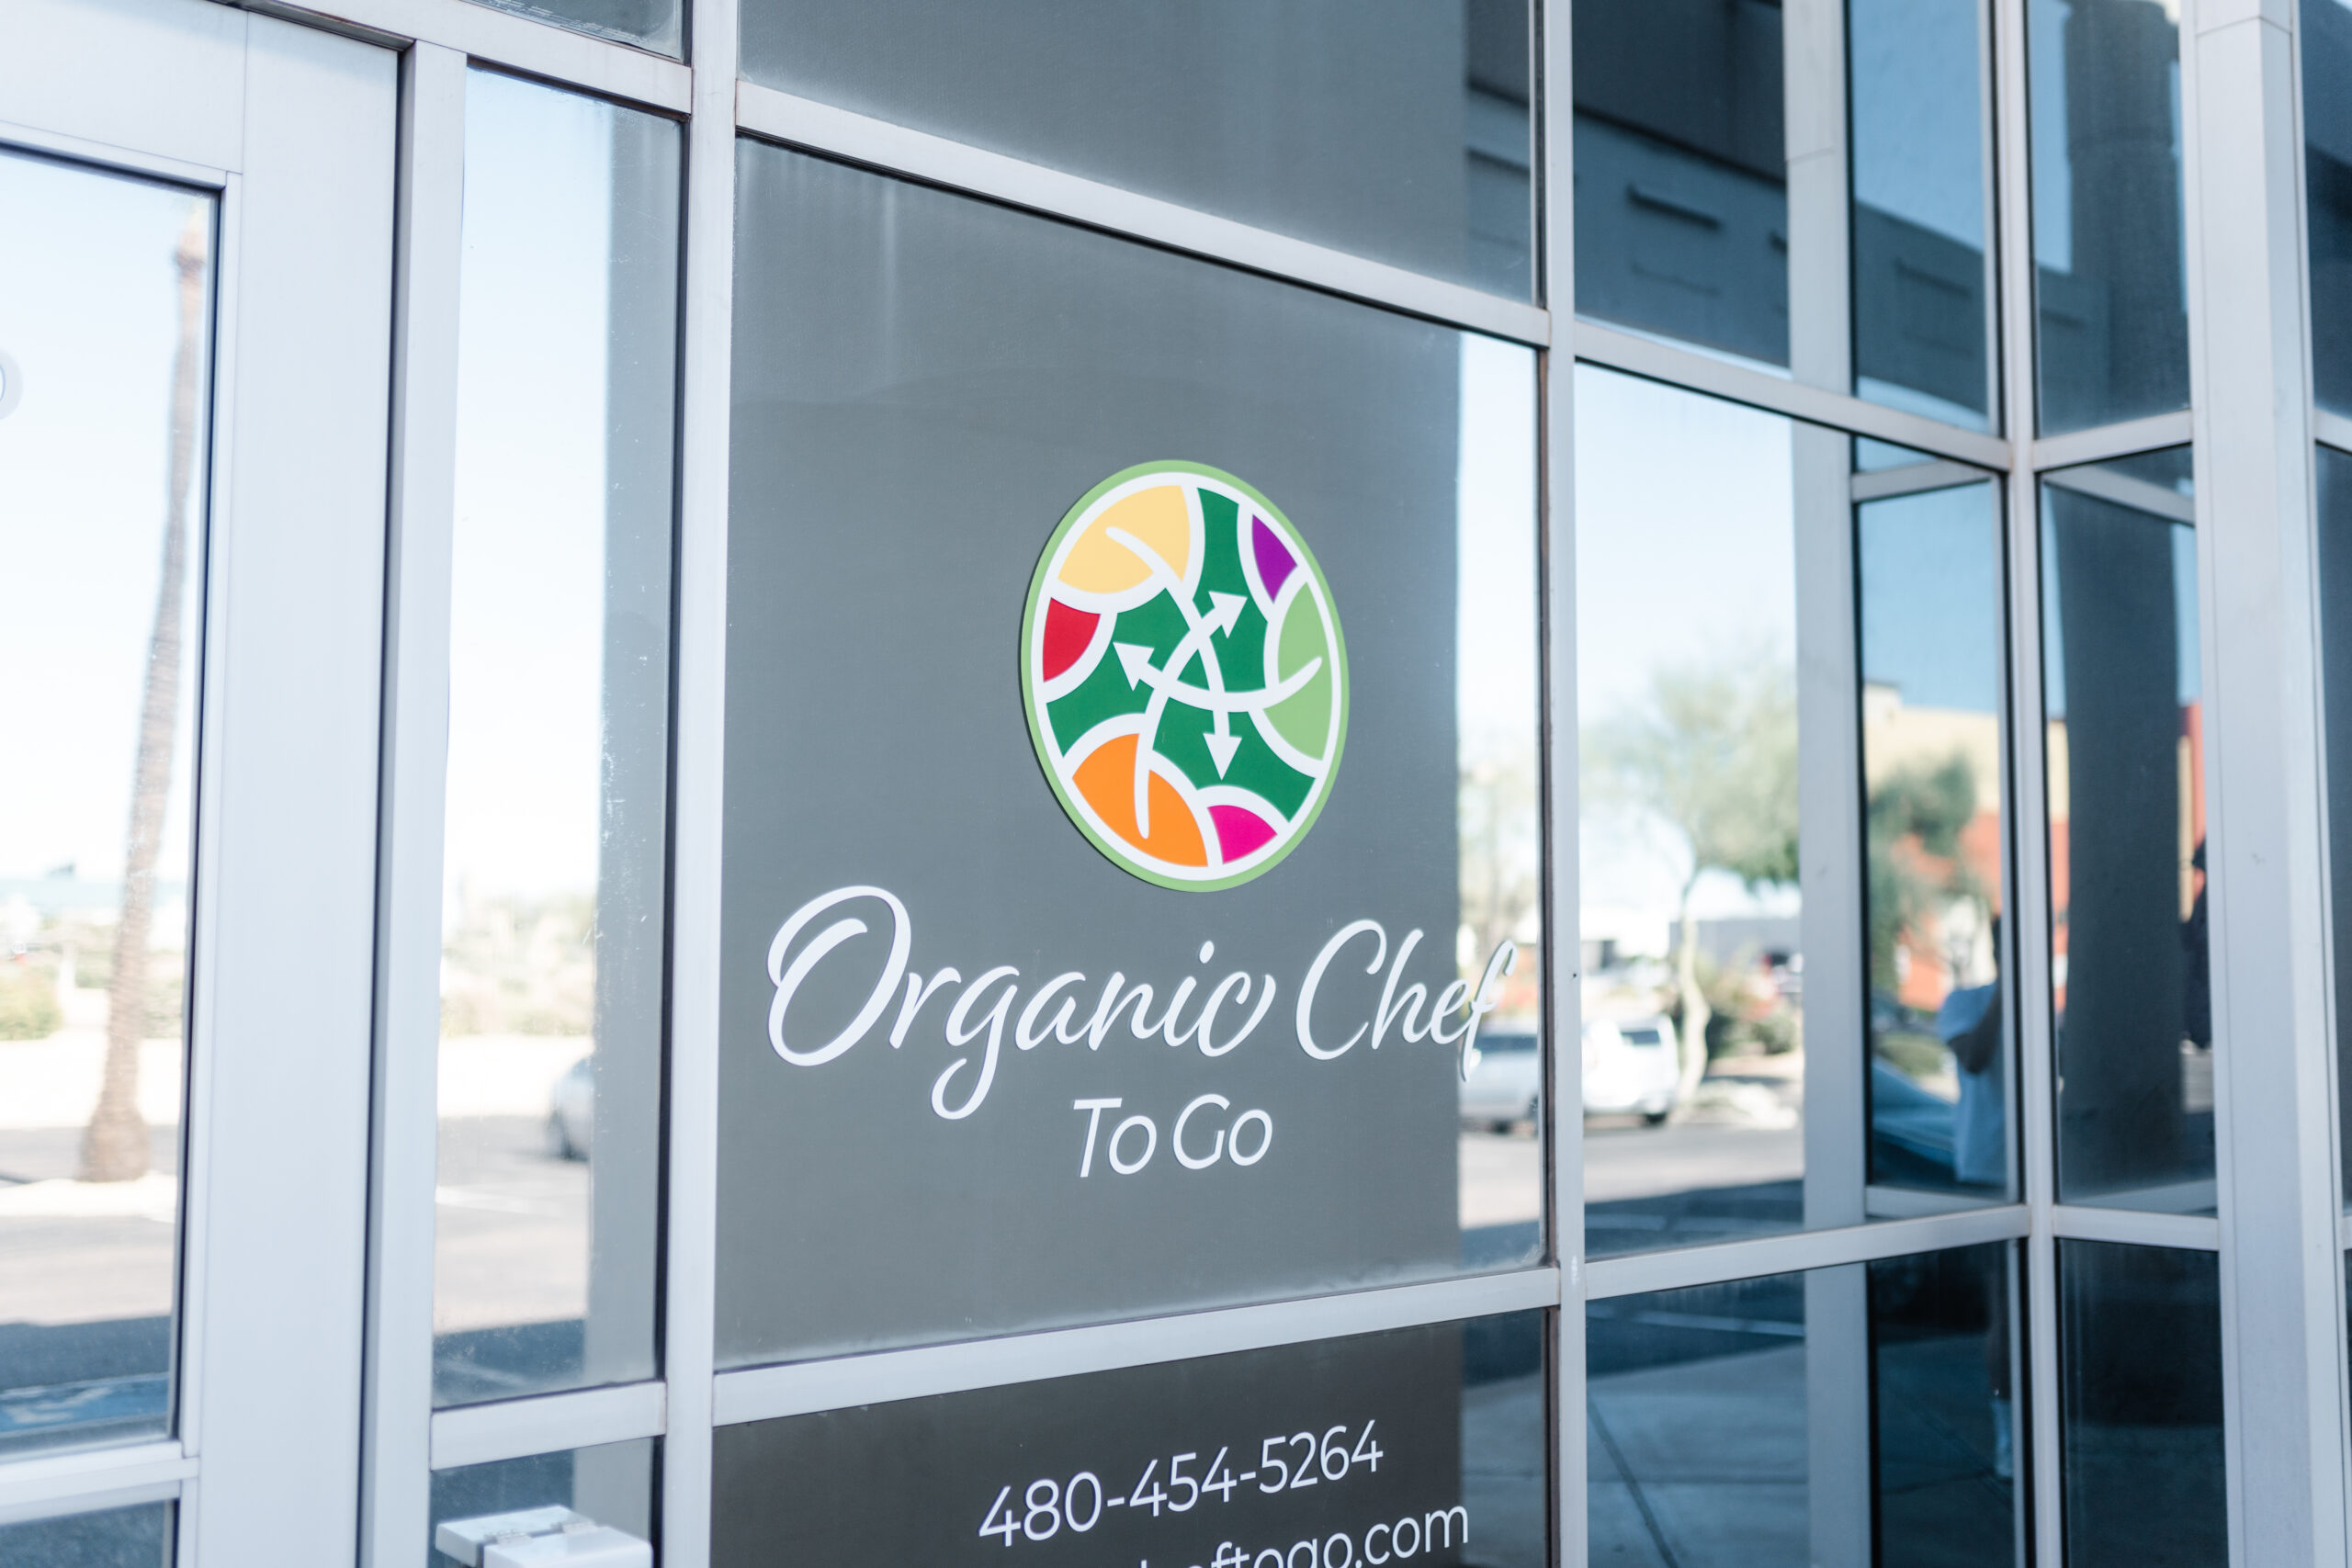 Health Food Store in Scottsdale - Organic Chef To Go